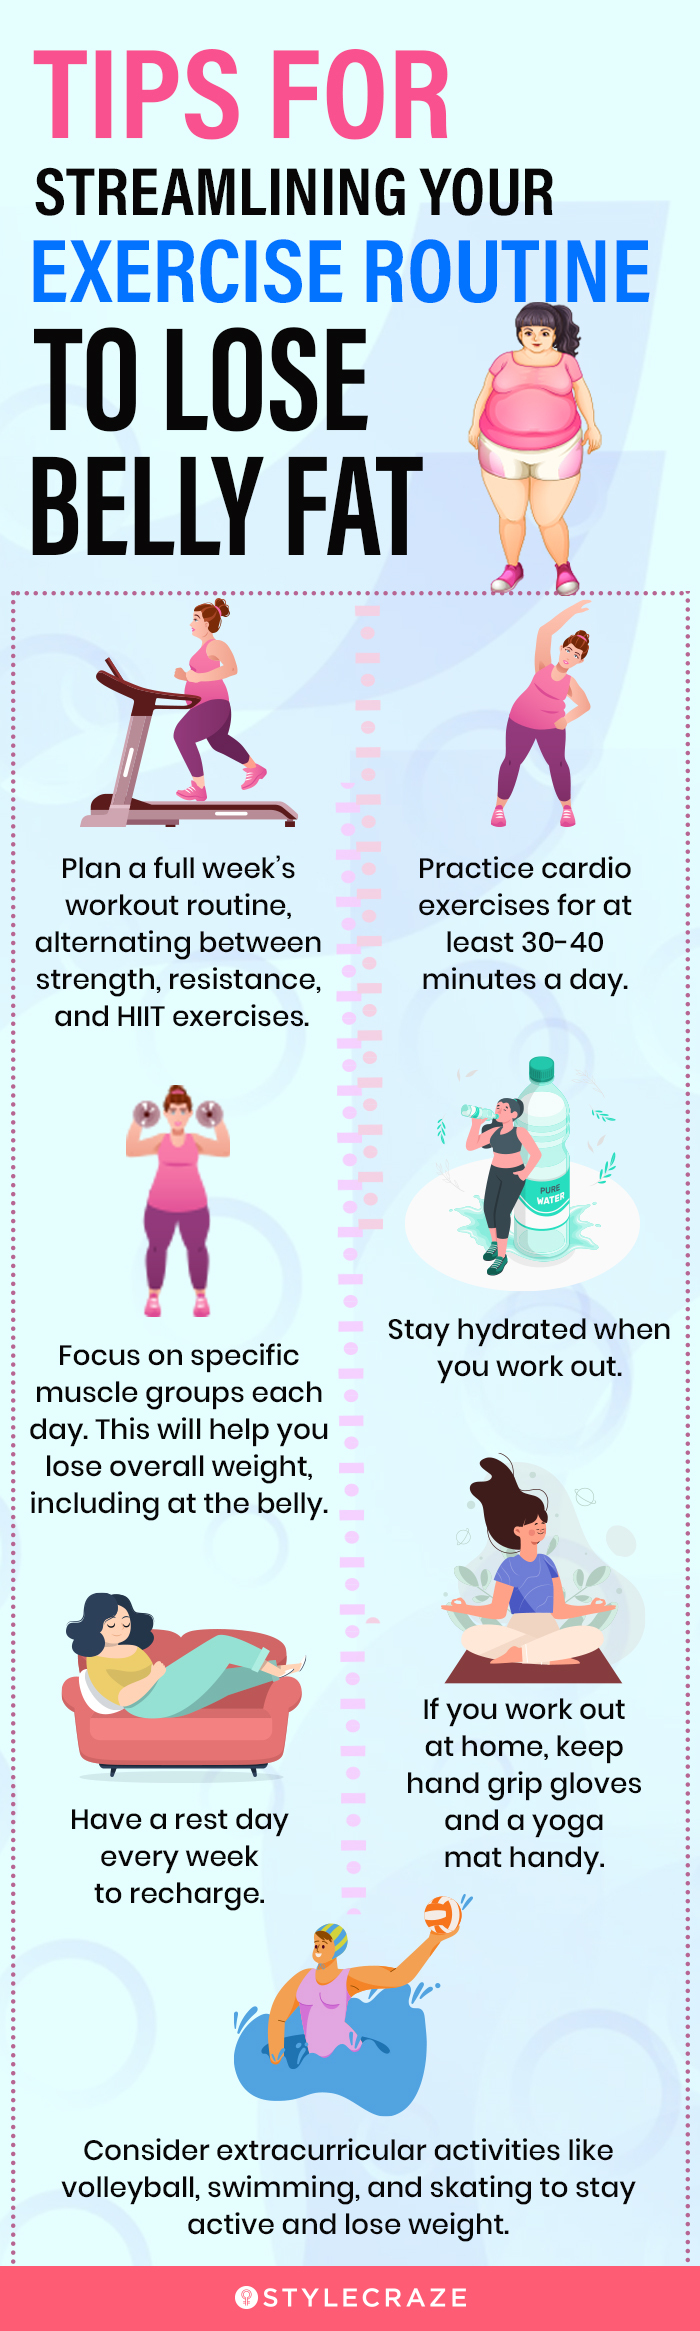 tips for streamlining your exercise routine to lose belly fat (infographic)